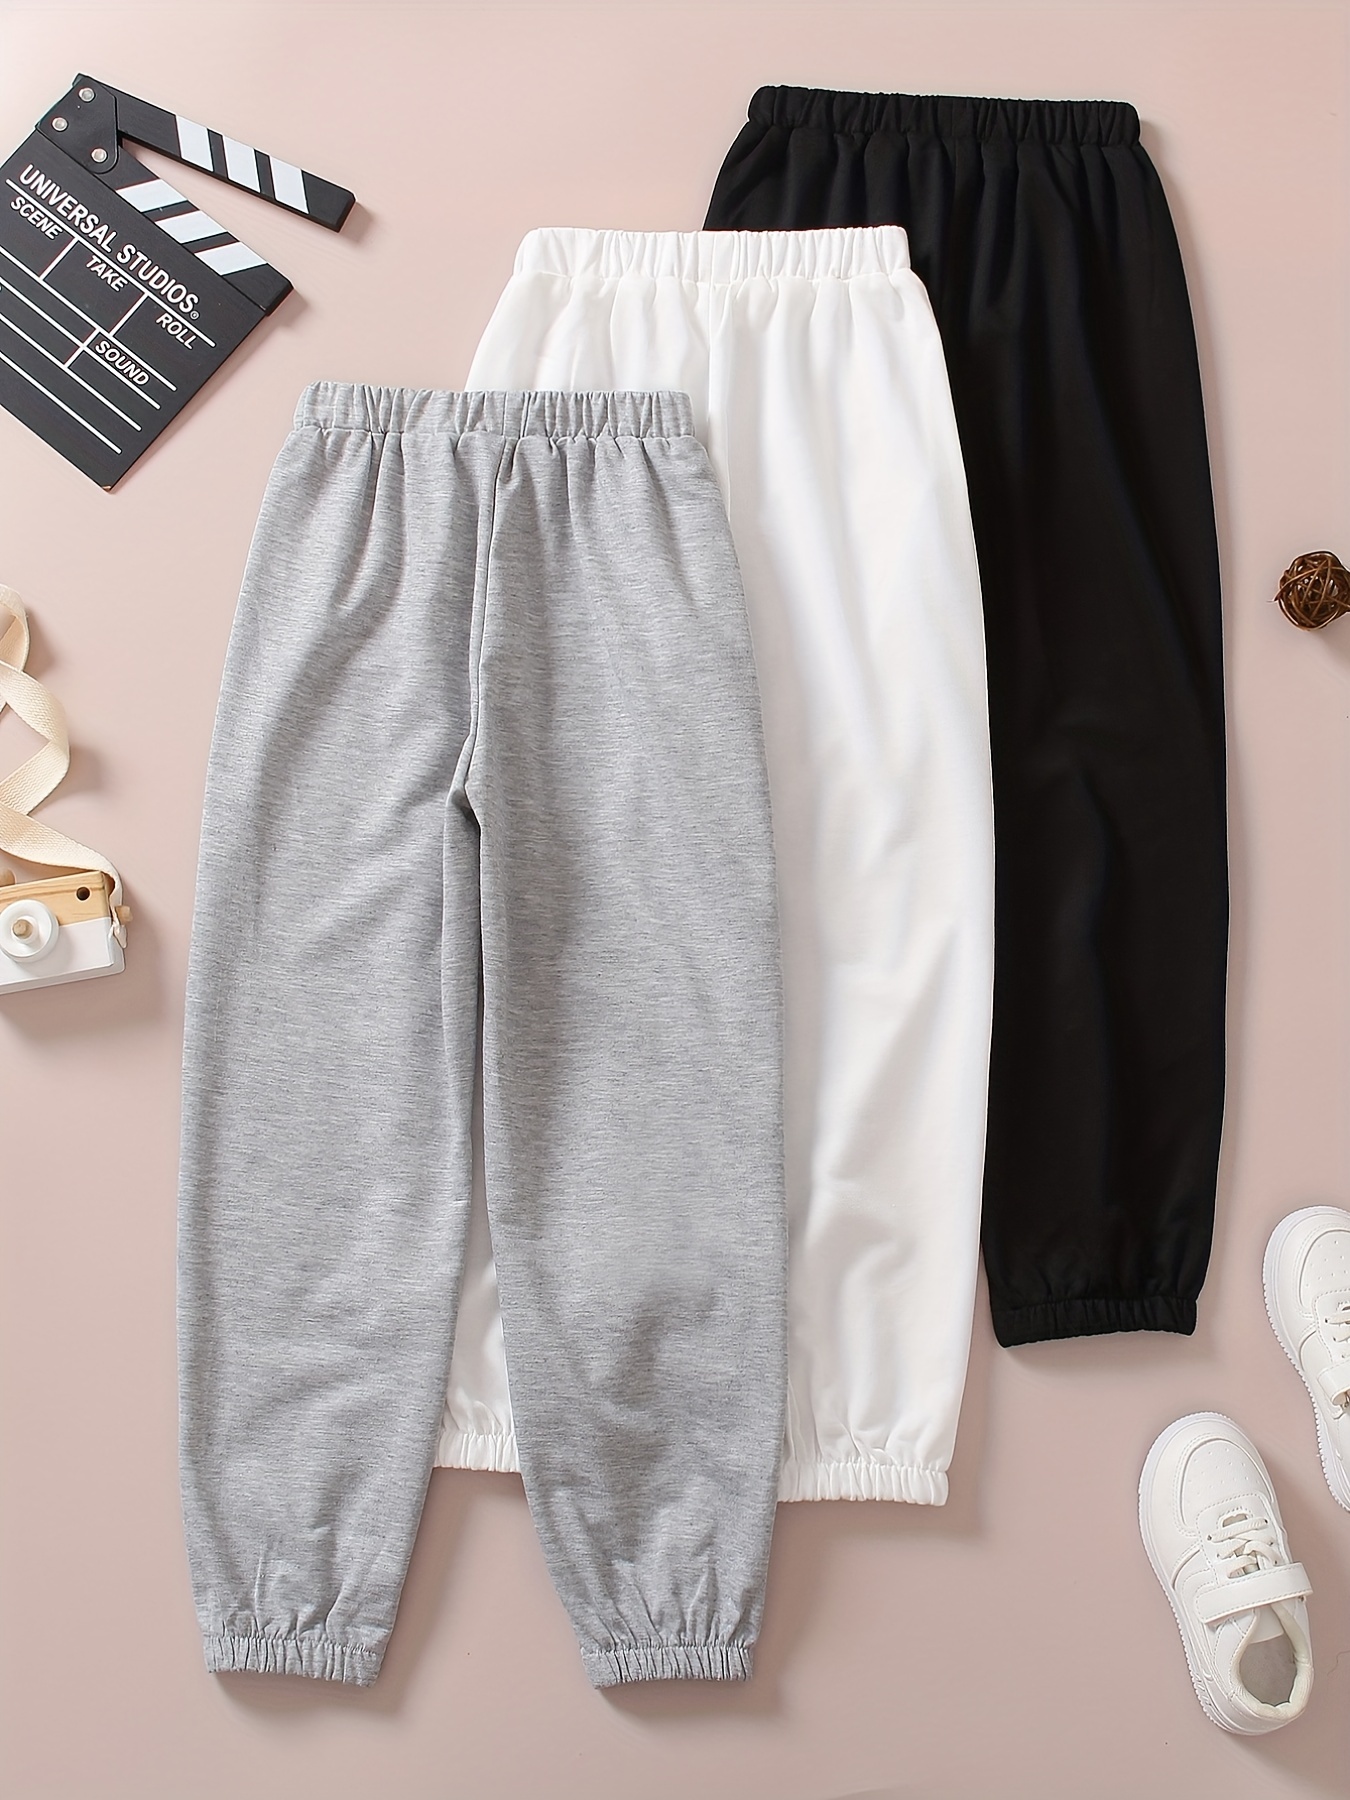 Girls Sweatpants & Joggers. Tracksuit Bottoms for Girls